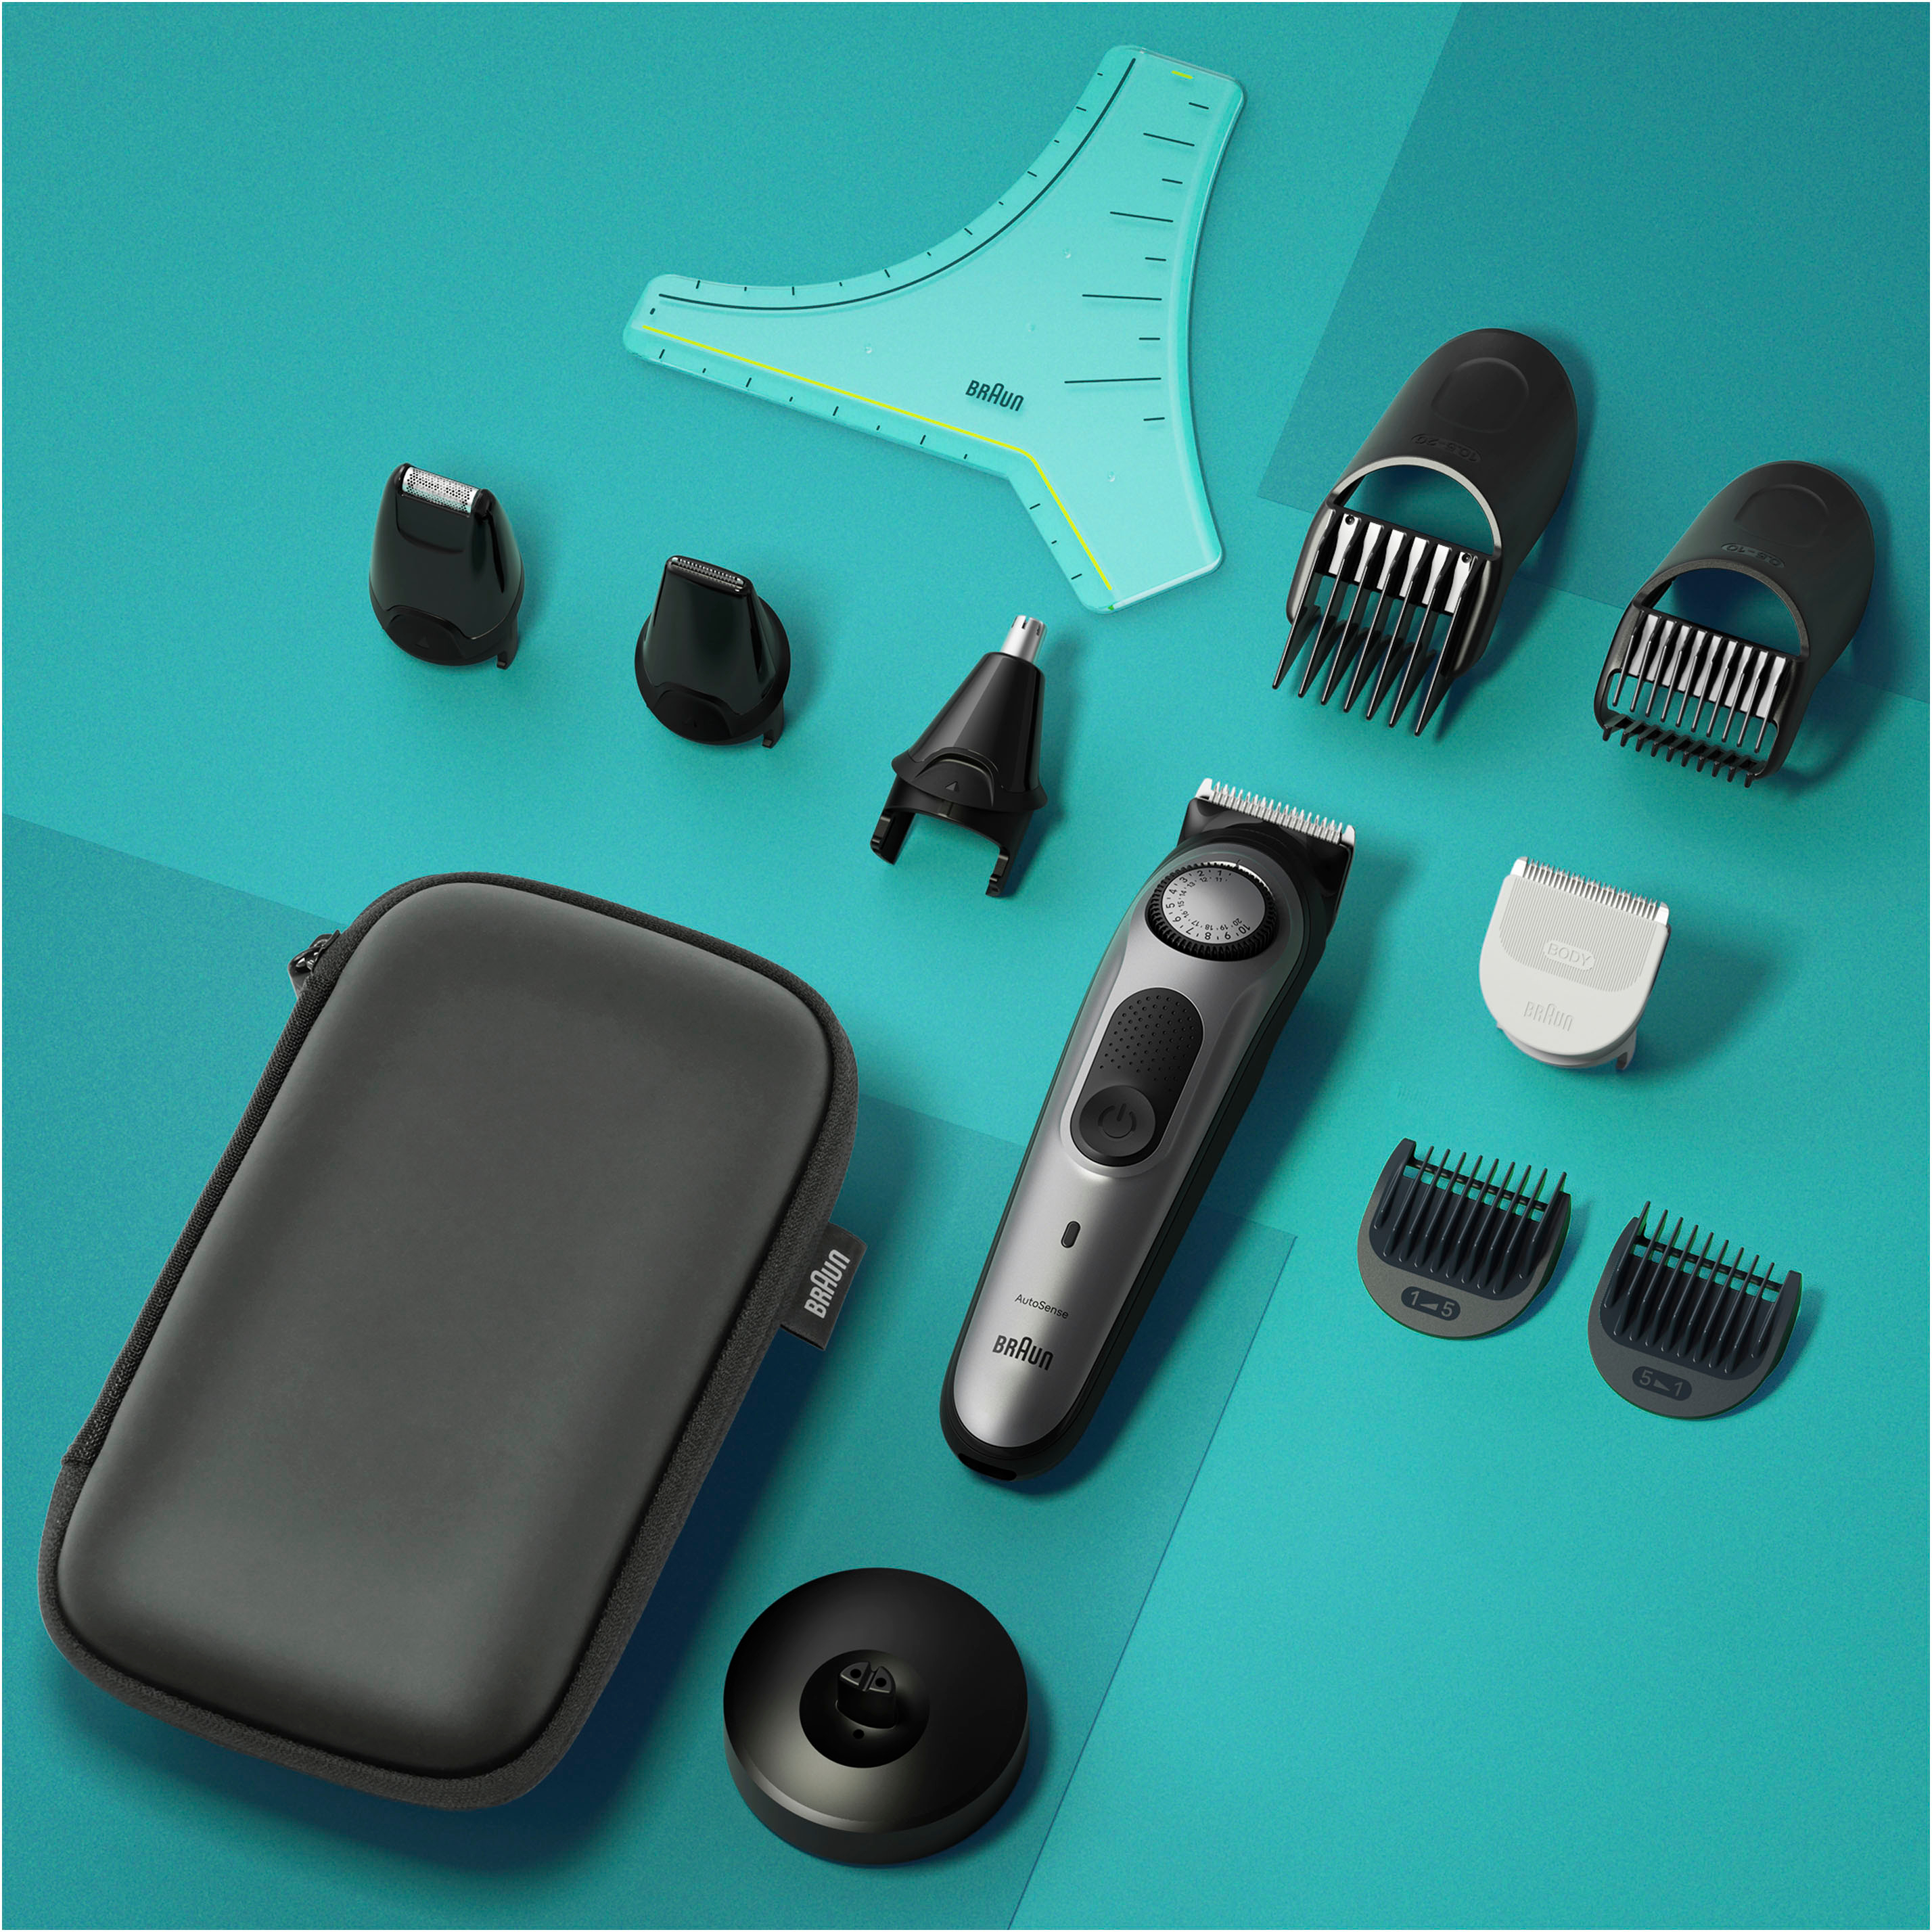 7 AiO7420 Buy with Silver Style Series Kit, Trimmer All-In-One Best - Grooming 11-in-1 More & Braun Kit 7420 Beard